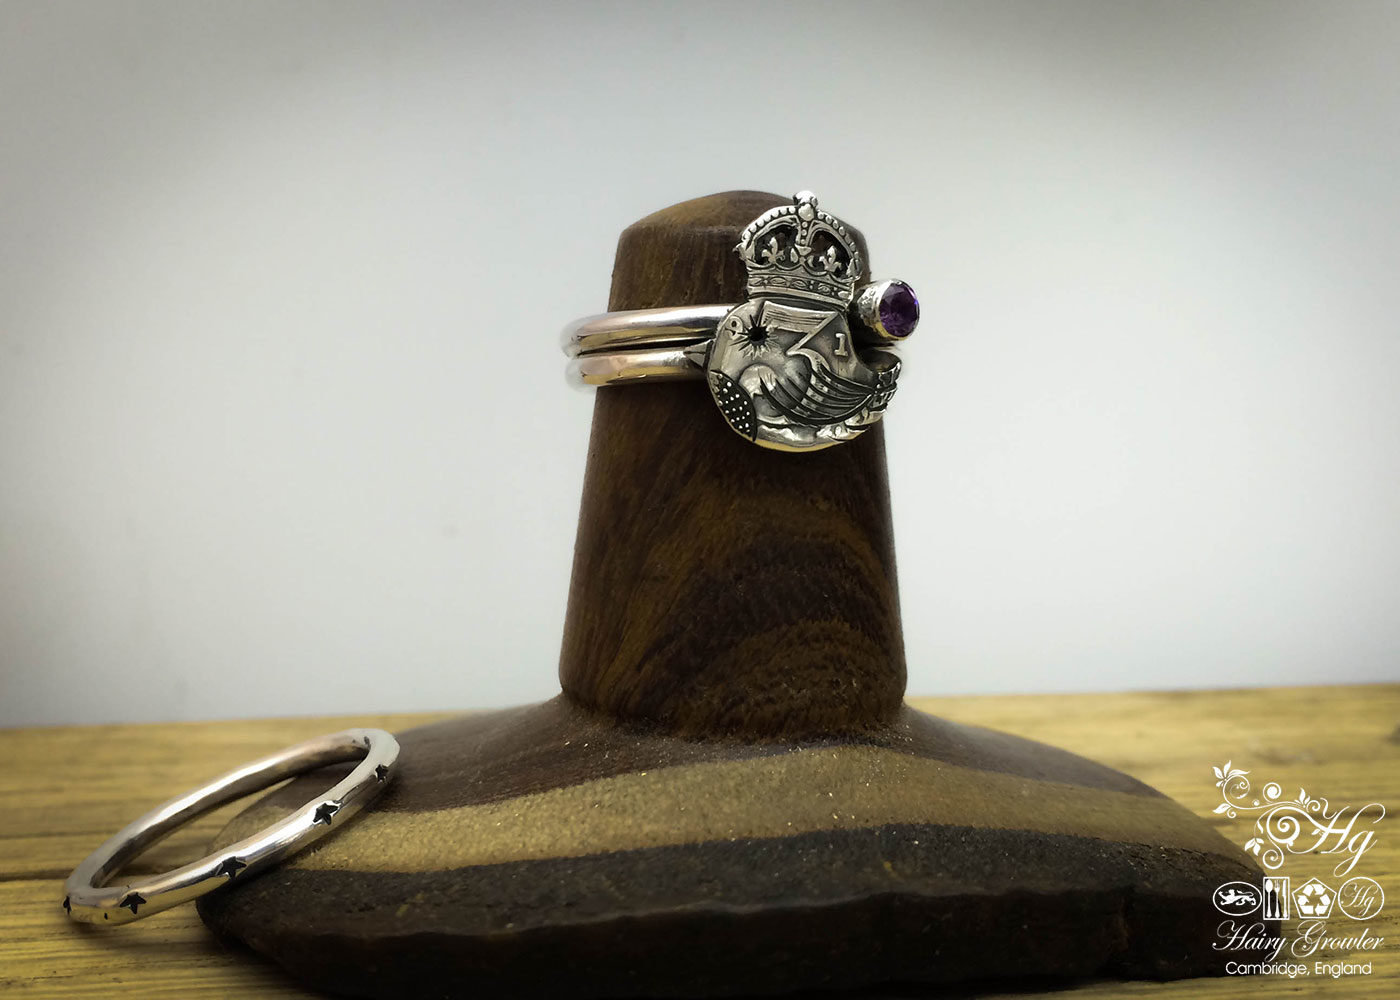 The 'teeny weeny bird queen' recycled silver threepence coin ring. Handcrafted and recycled silver bird ring